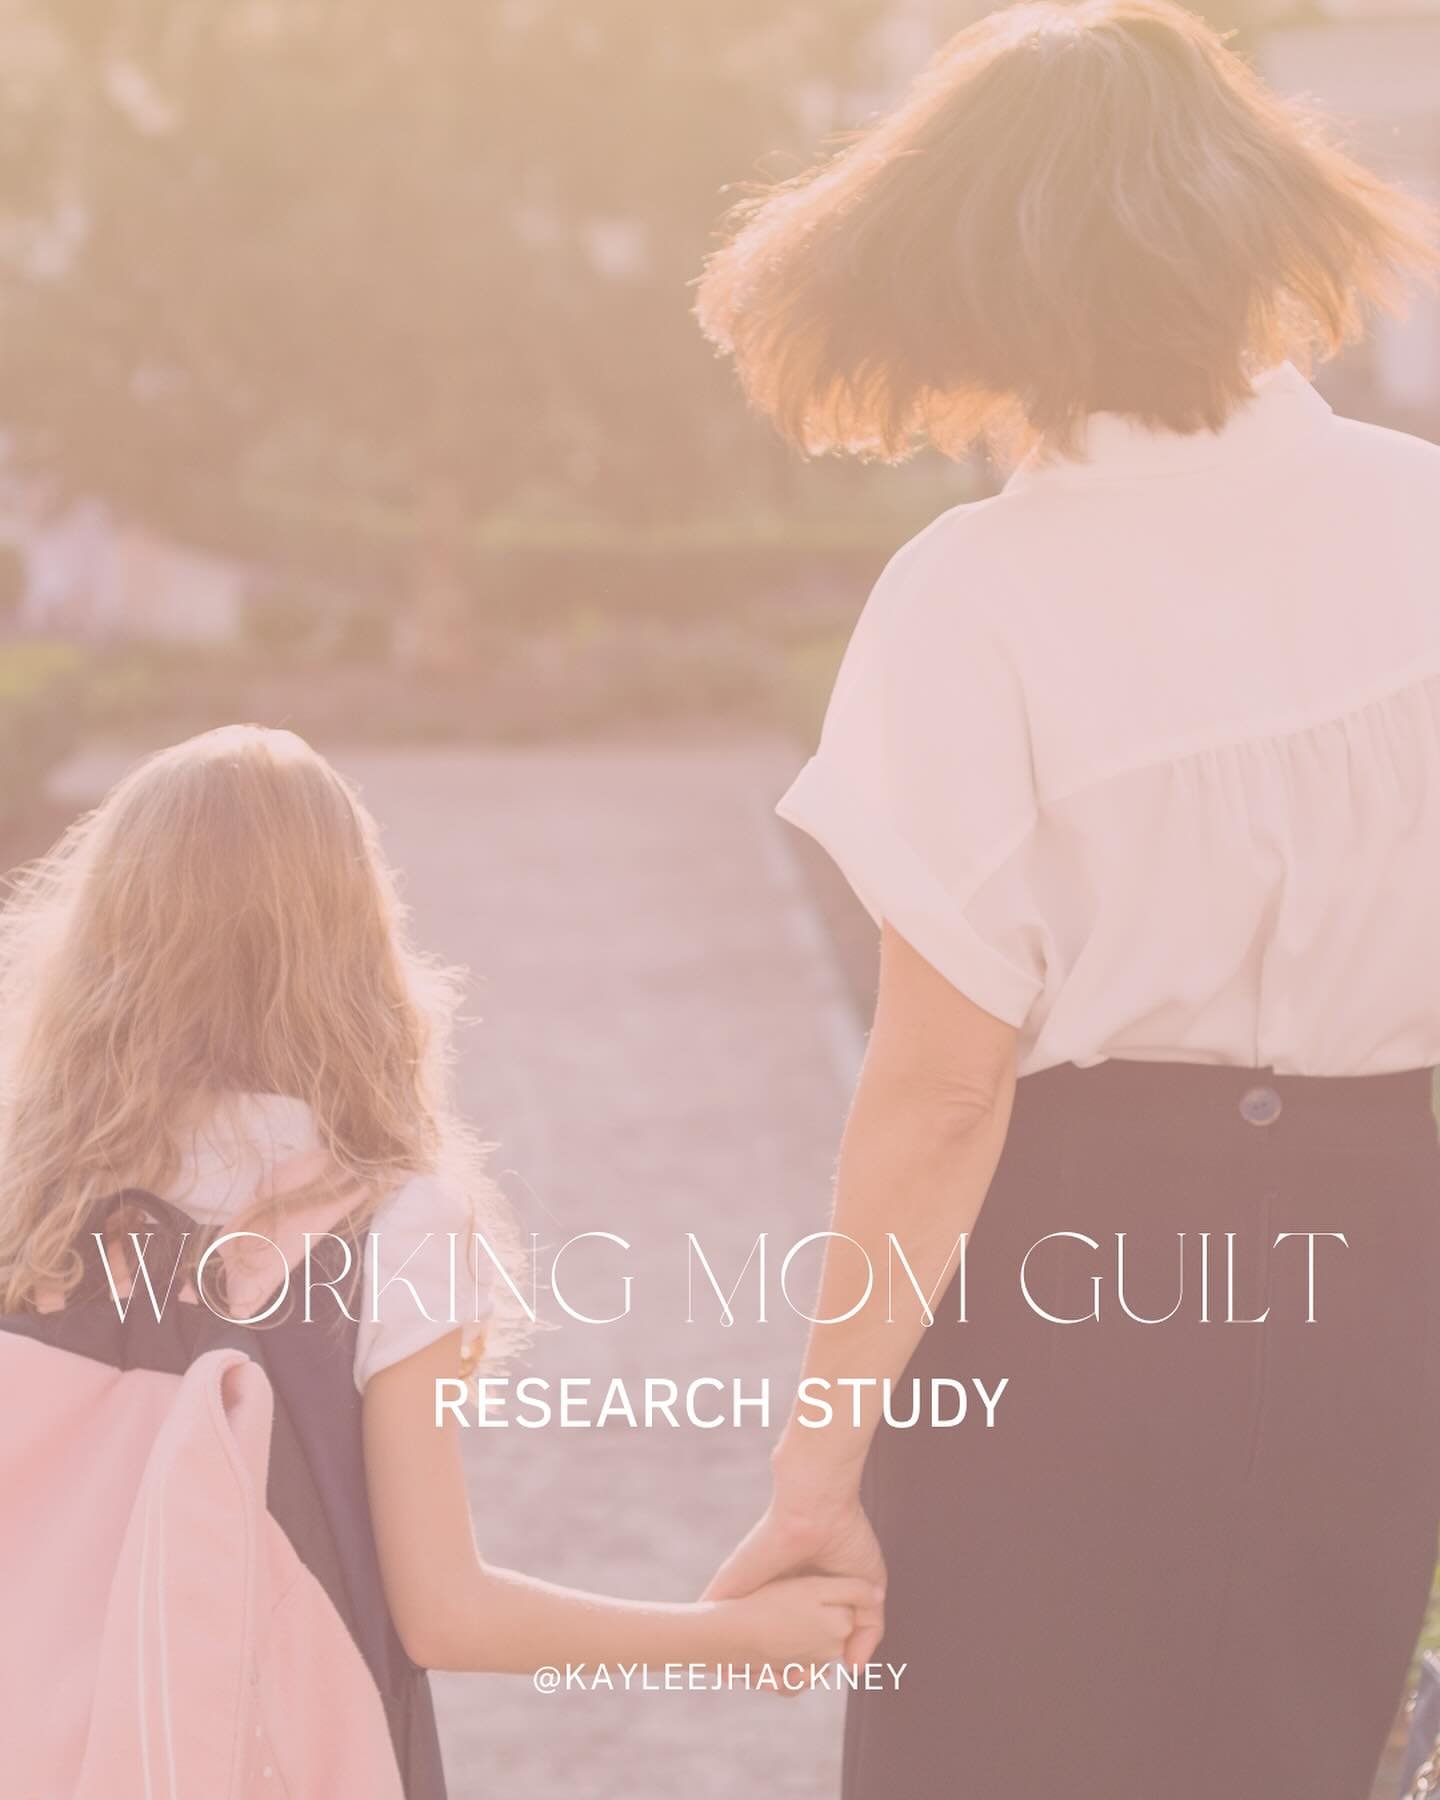 ✨Comment &ldquo;GUILT&rdquo; and I&rsquo;ll send you the link to the survey!

We&rsquo;ve all been there...

Trapped between work and family.

On the one hand, we feel guilty about dropping our kids off at daycare so that we can go to work.

On the o